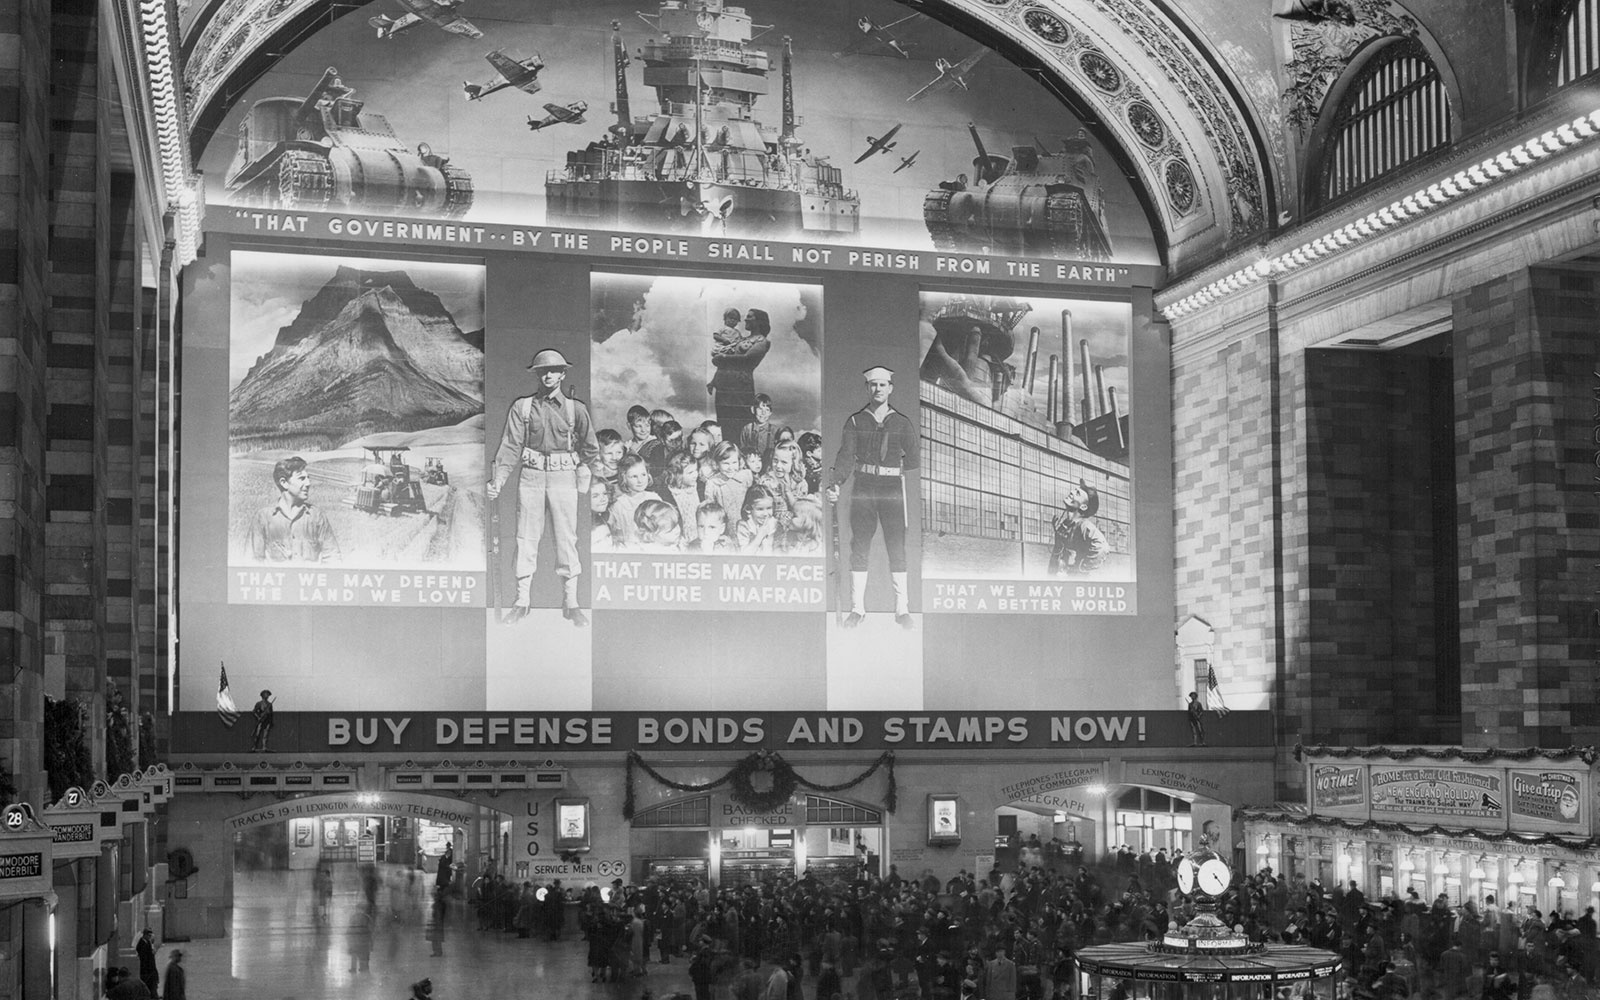 Transport Yourself Back to New York City's Grand Central Station in the 1940s